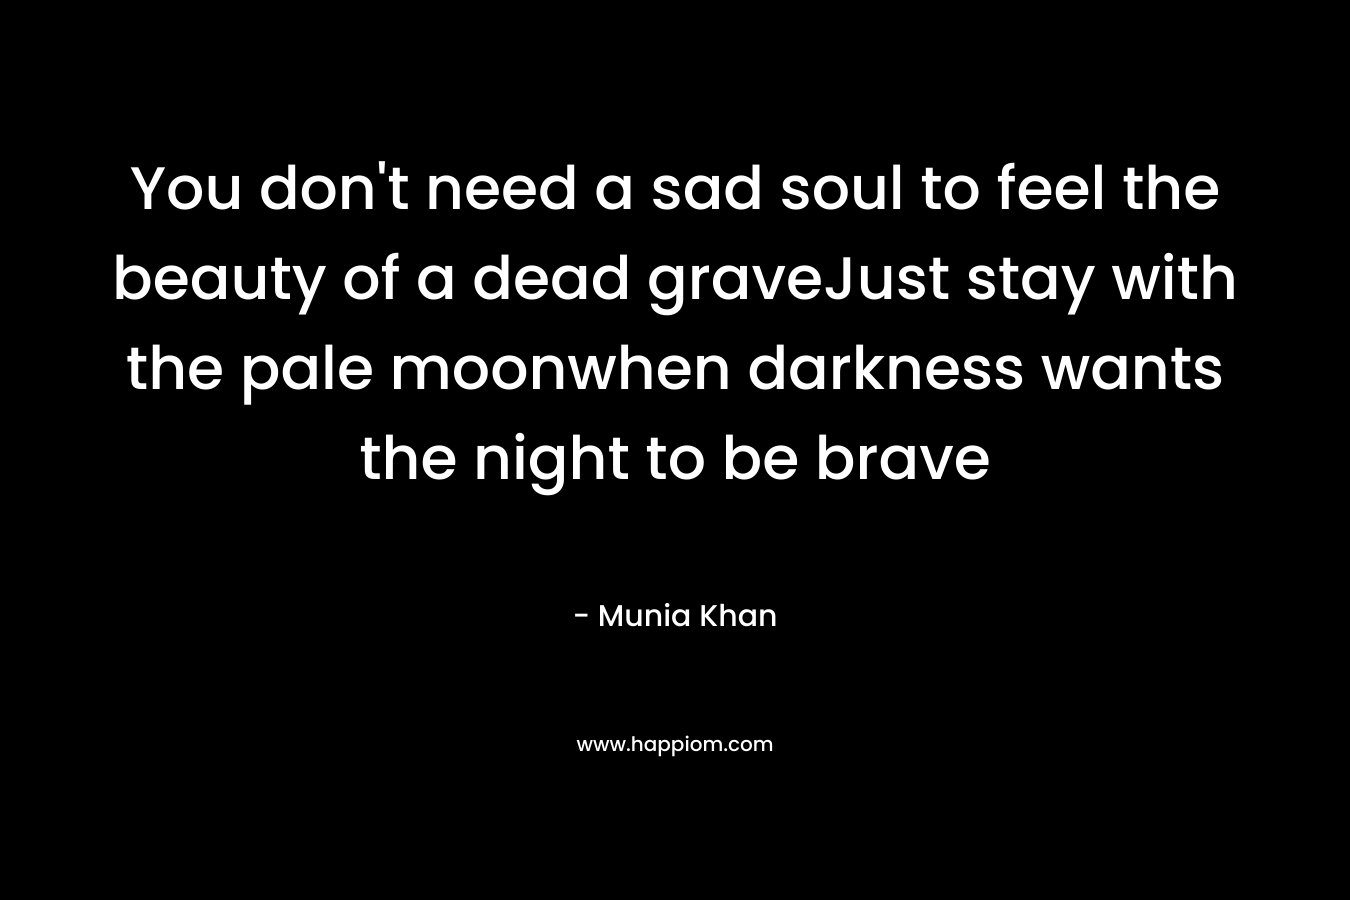 You don't need a sad soul to feel the beauty of a dead graveJust stay with the pale moonwhen darkness wants the night to be brave